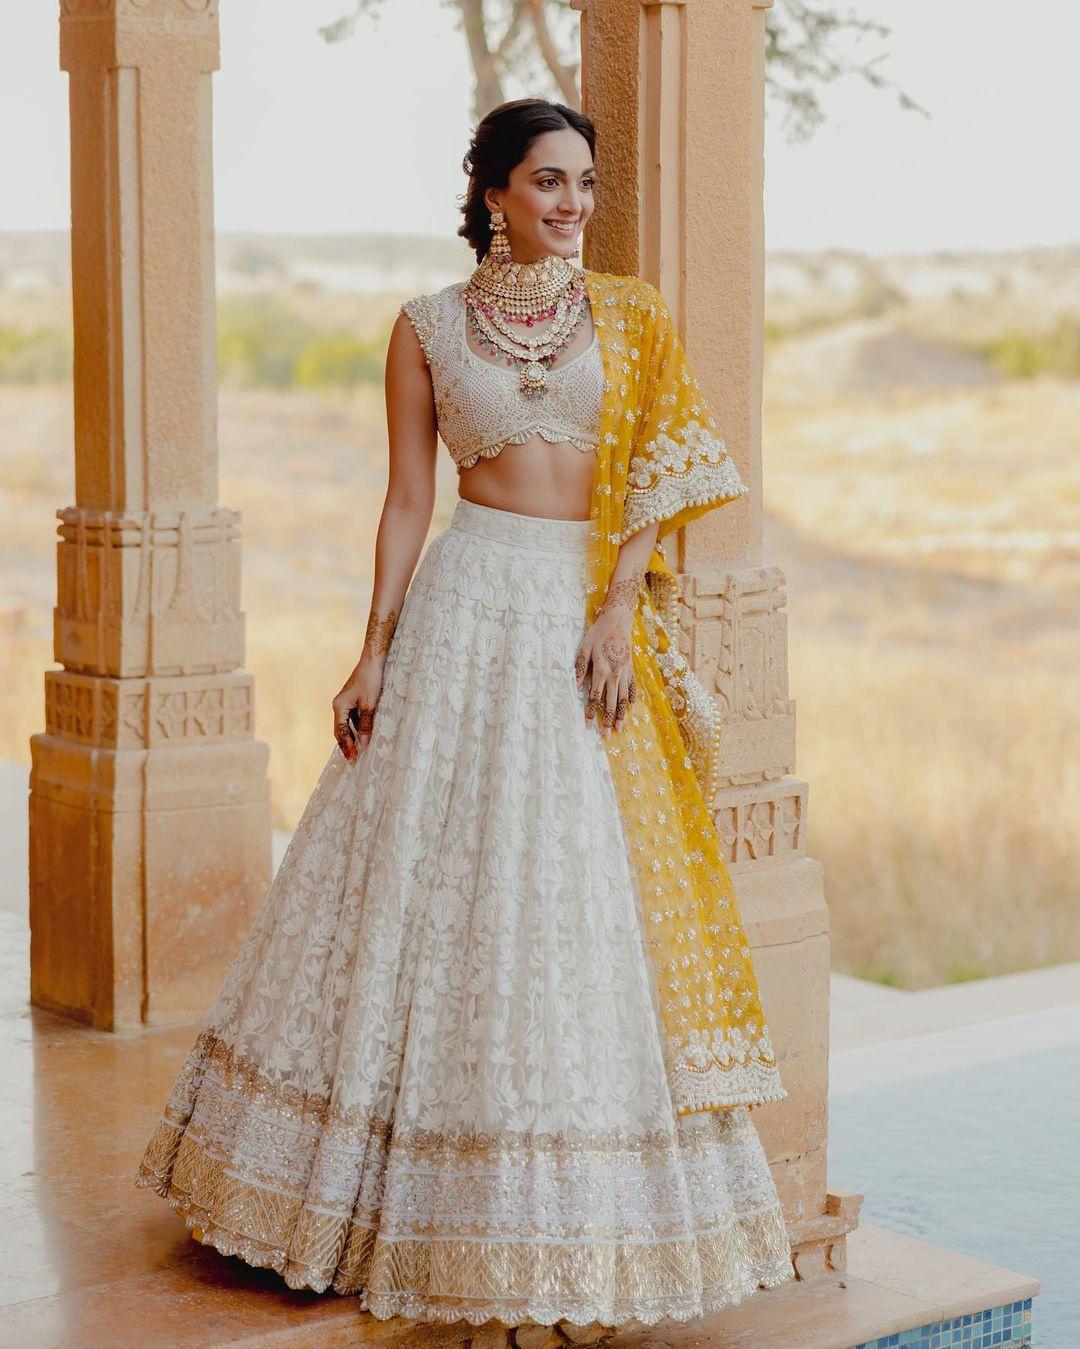 10 Trendy Ideas To Pair Up Jewellery With Bridal Lehenga; Colour Contrast  It With The Wedding Outfit